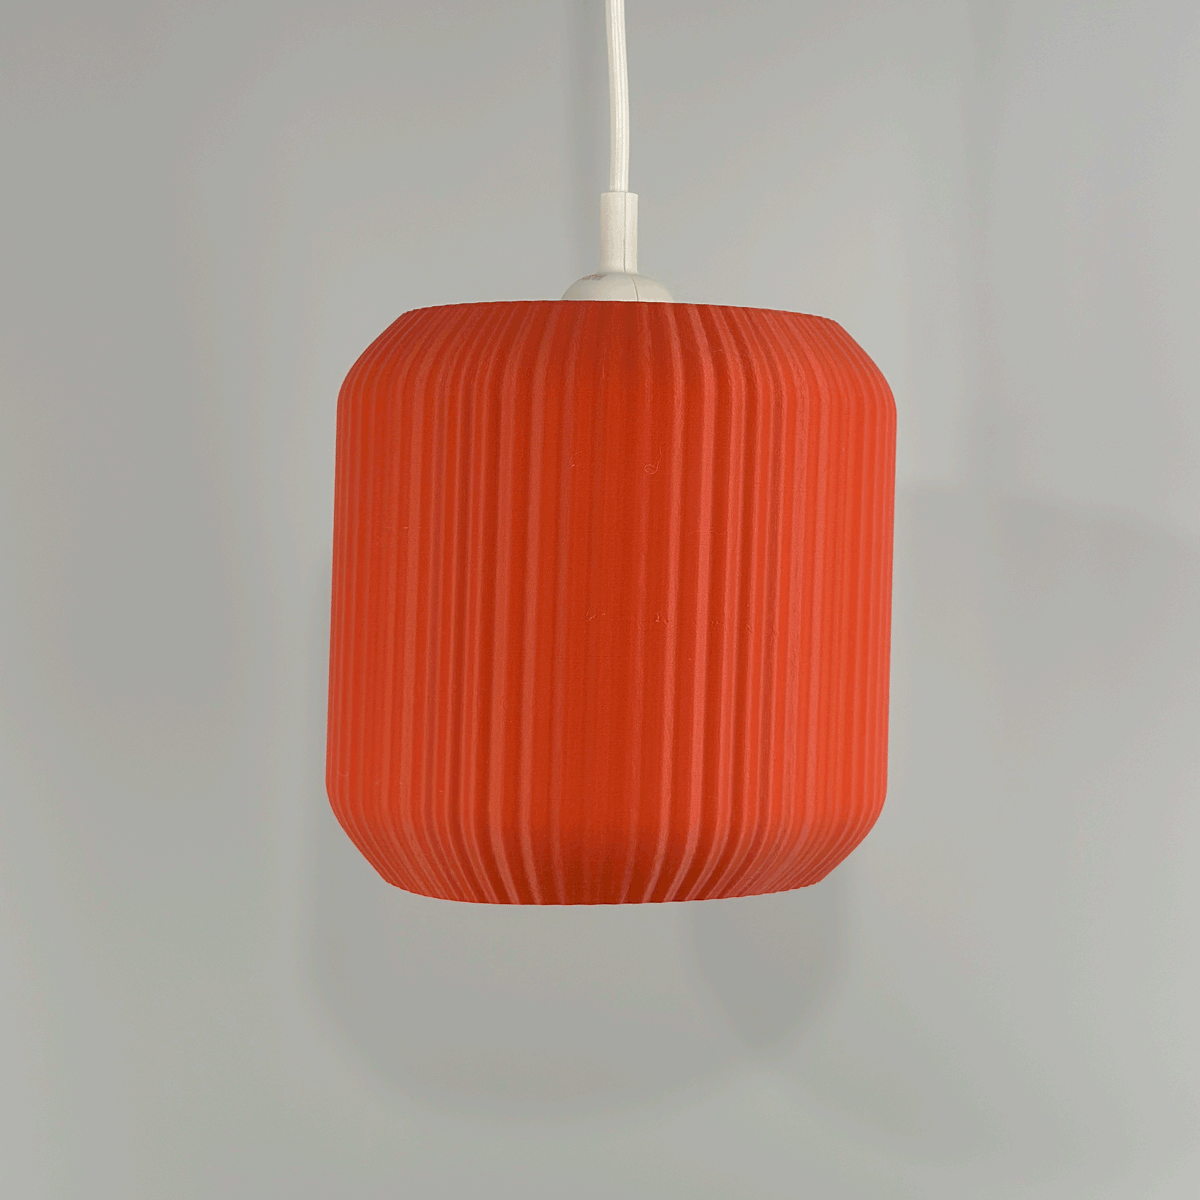 Lucash lampshade in muted red- onn and off, adding a vibrant touch to modern home settings with its unique 3D printed structure.